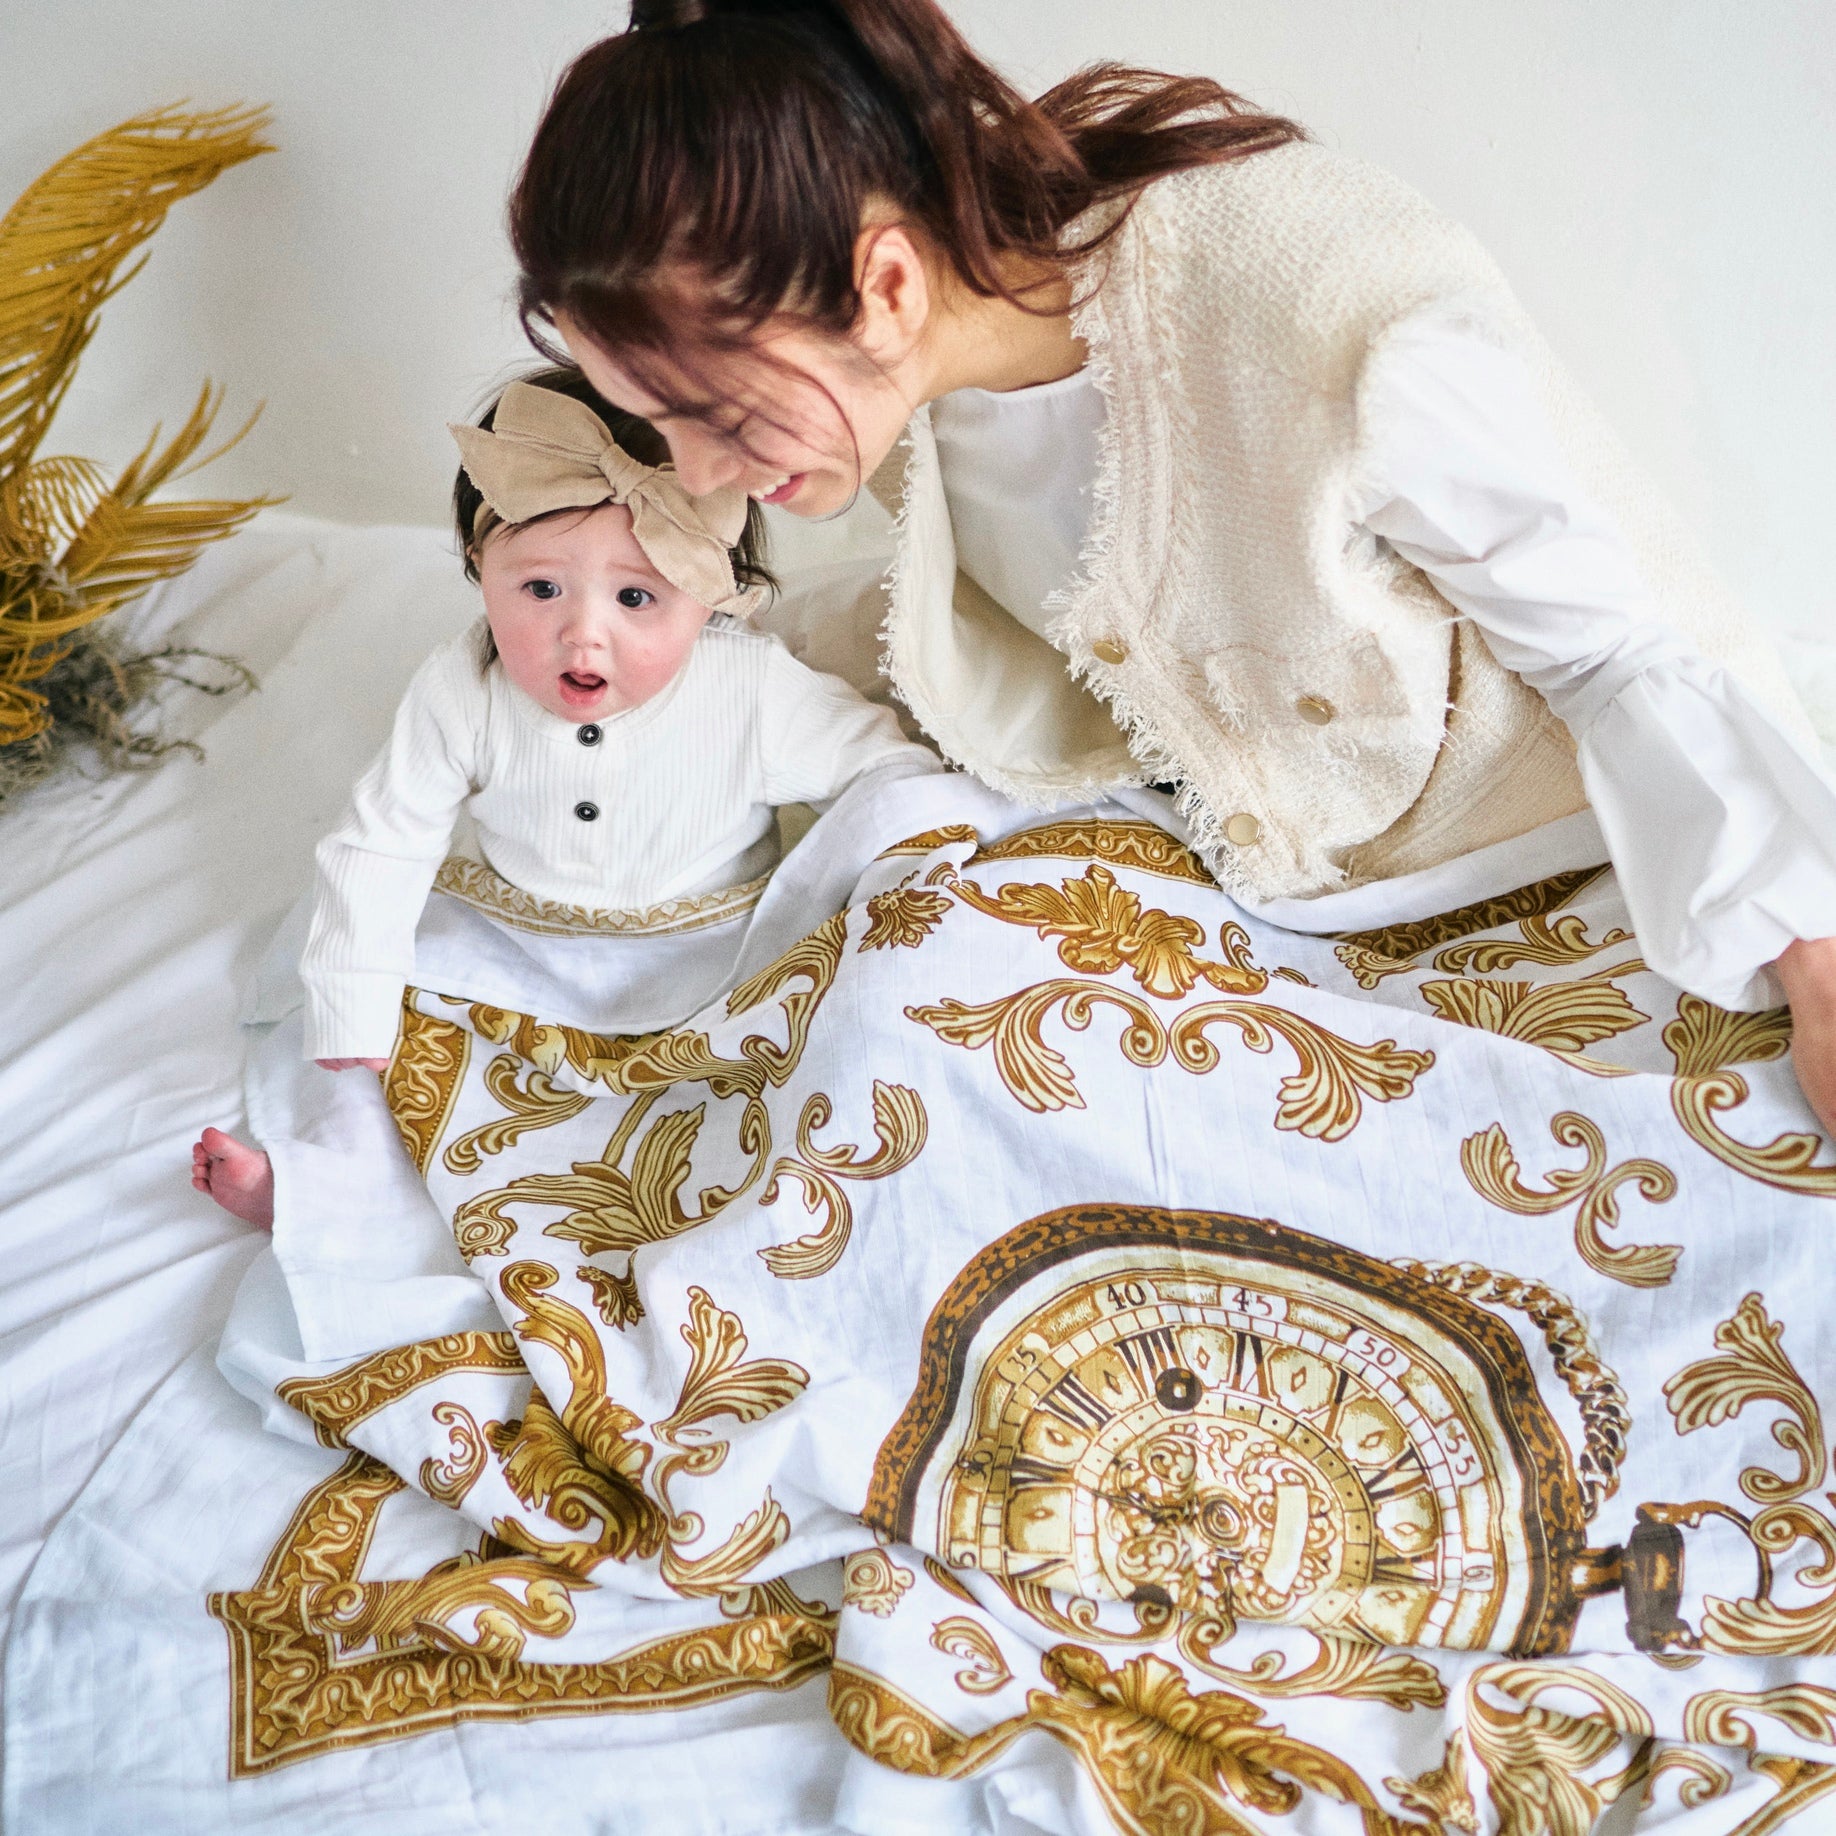 Stay Gold Swaddle